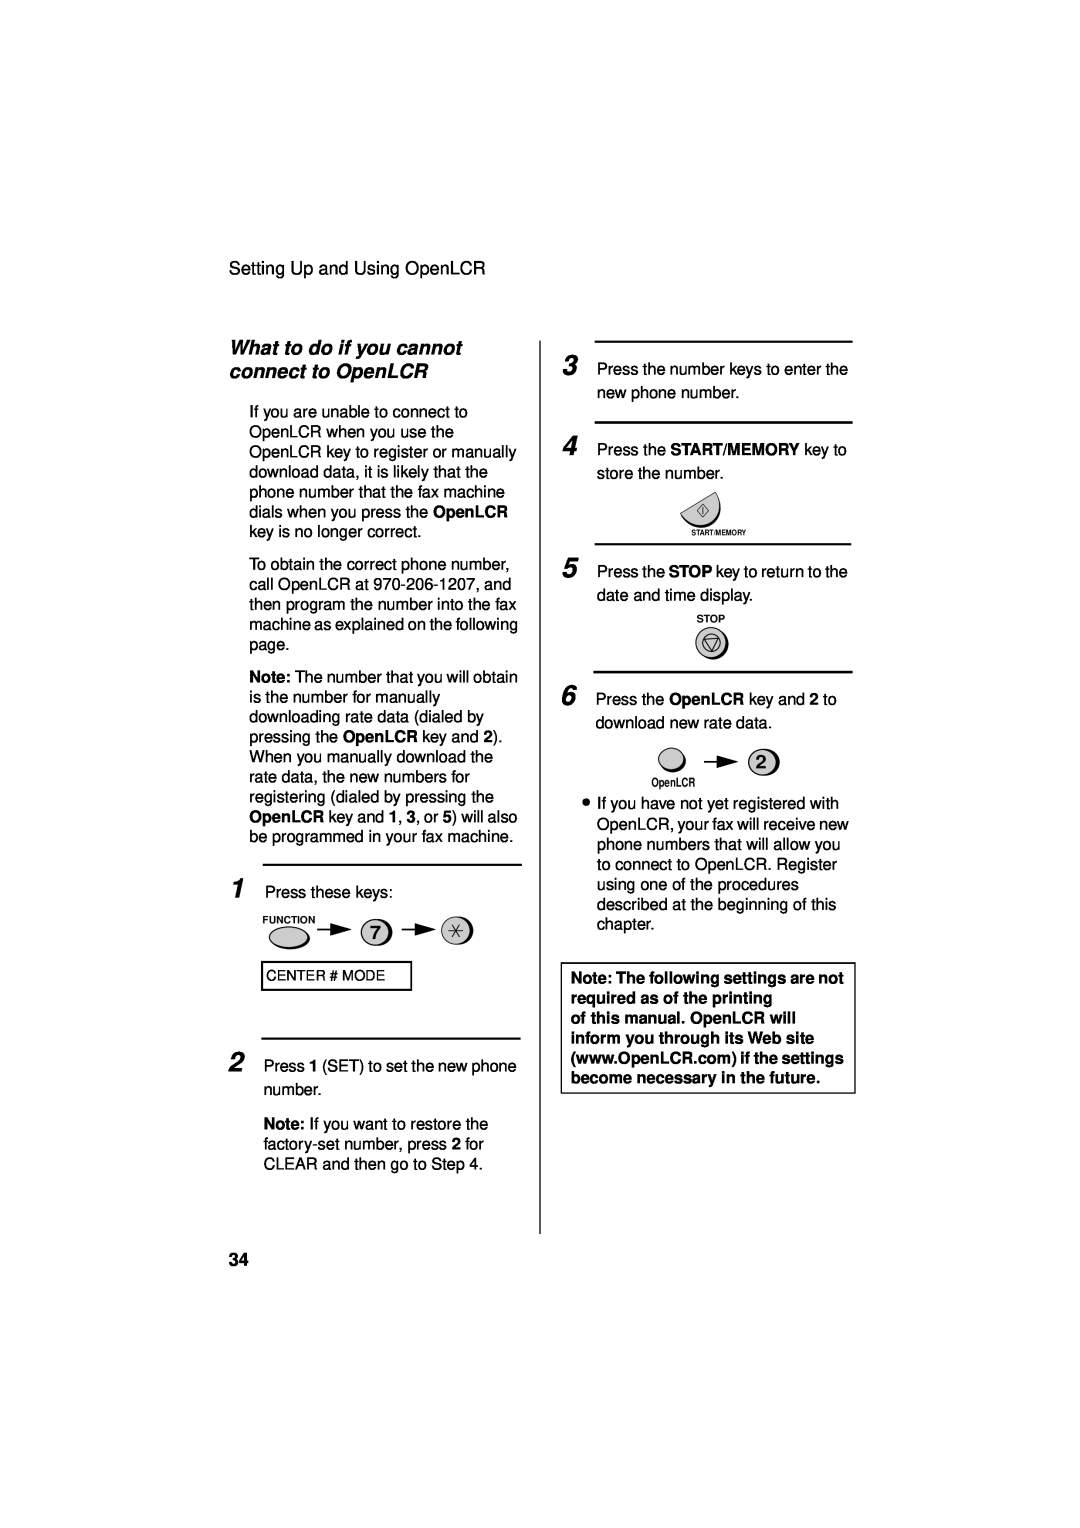 Sharp UX-340LM manual What to do if you cannot connect to OpenLCR 